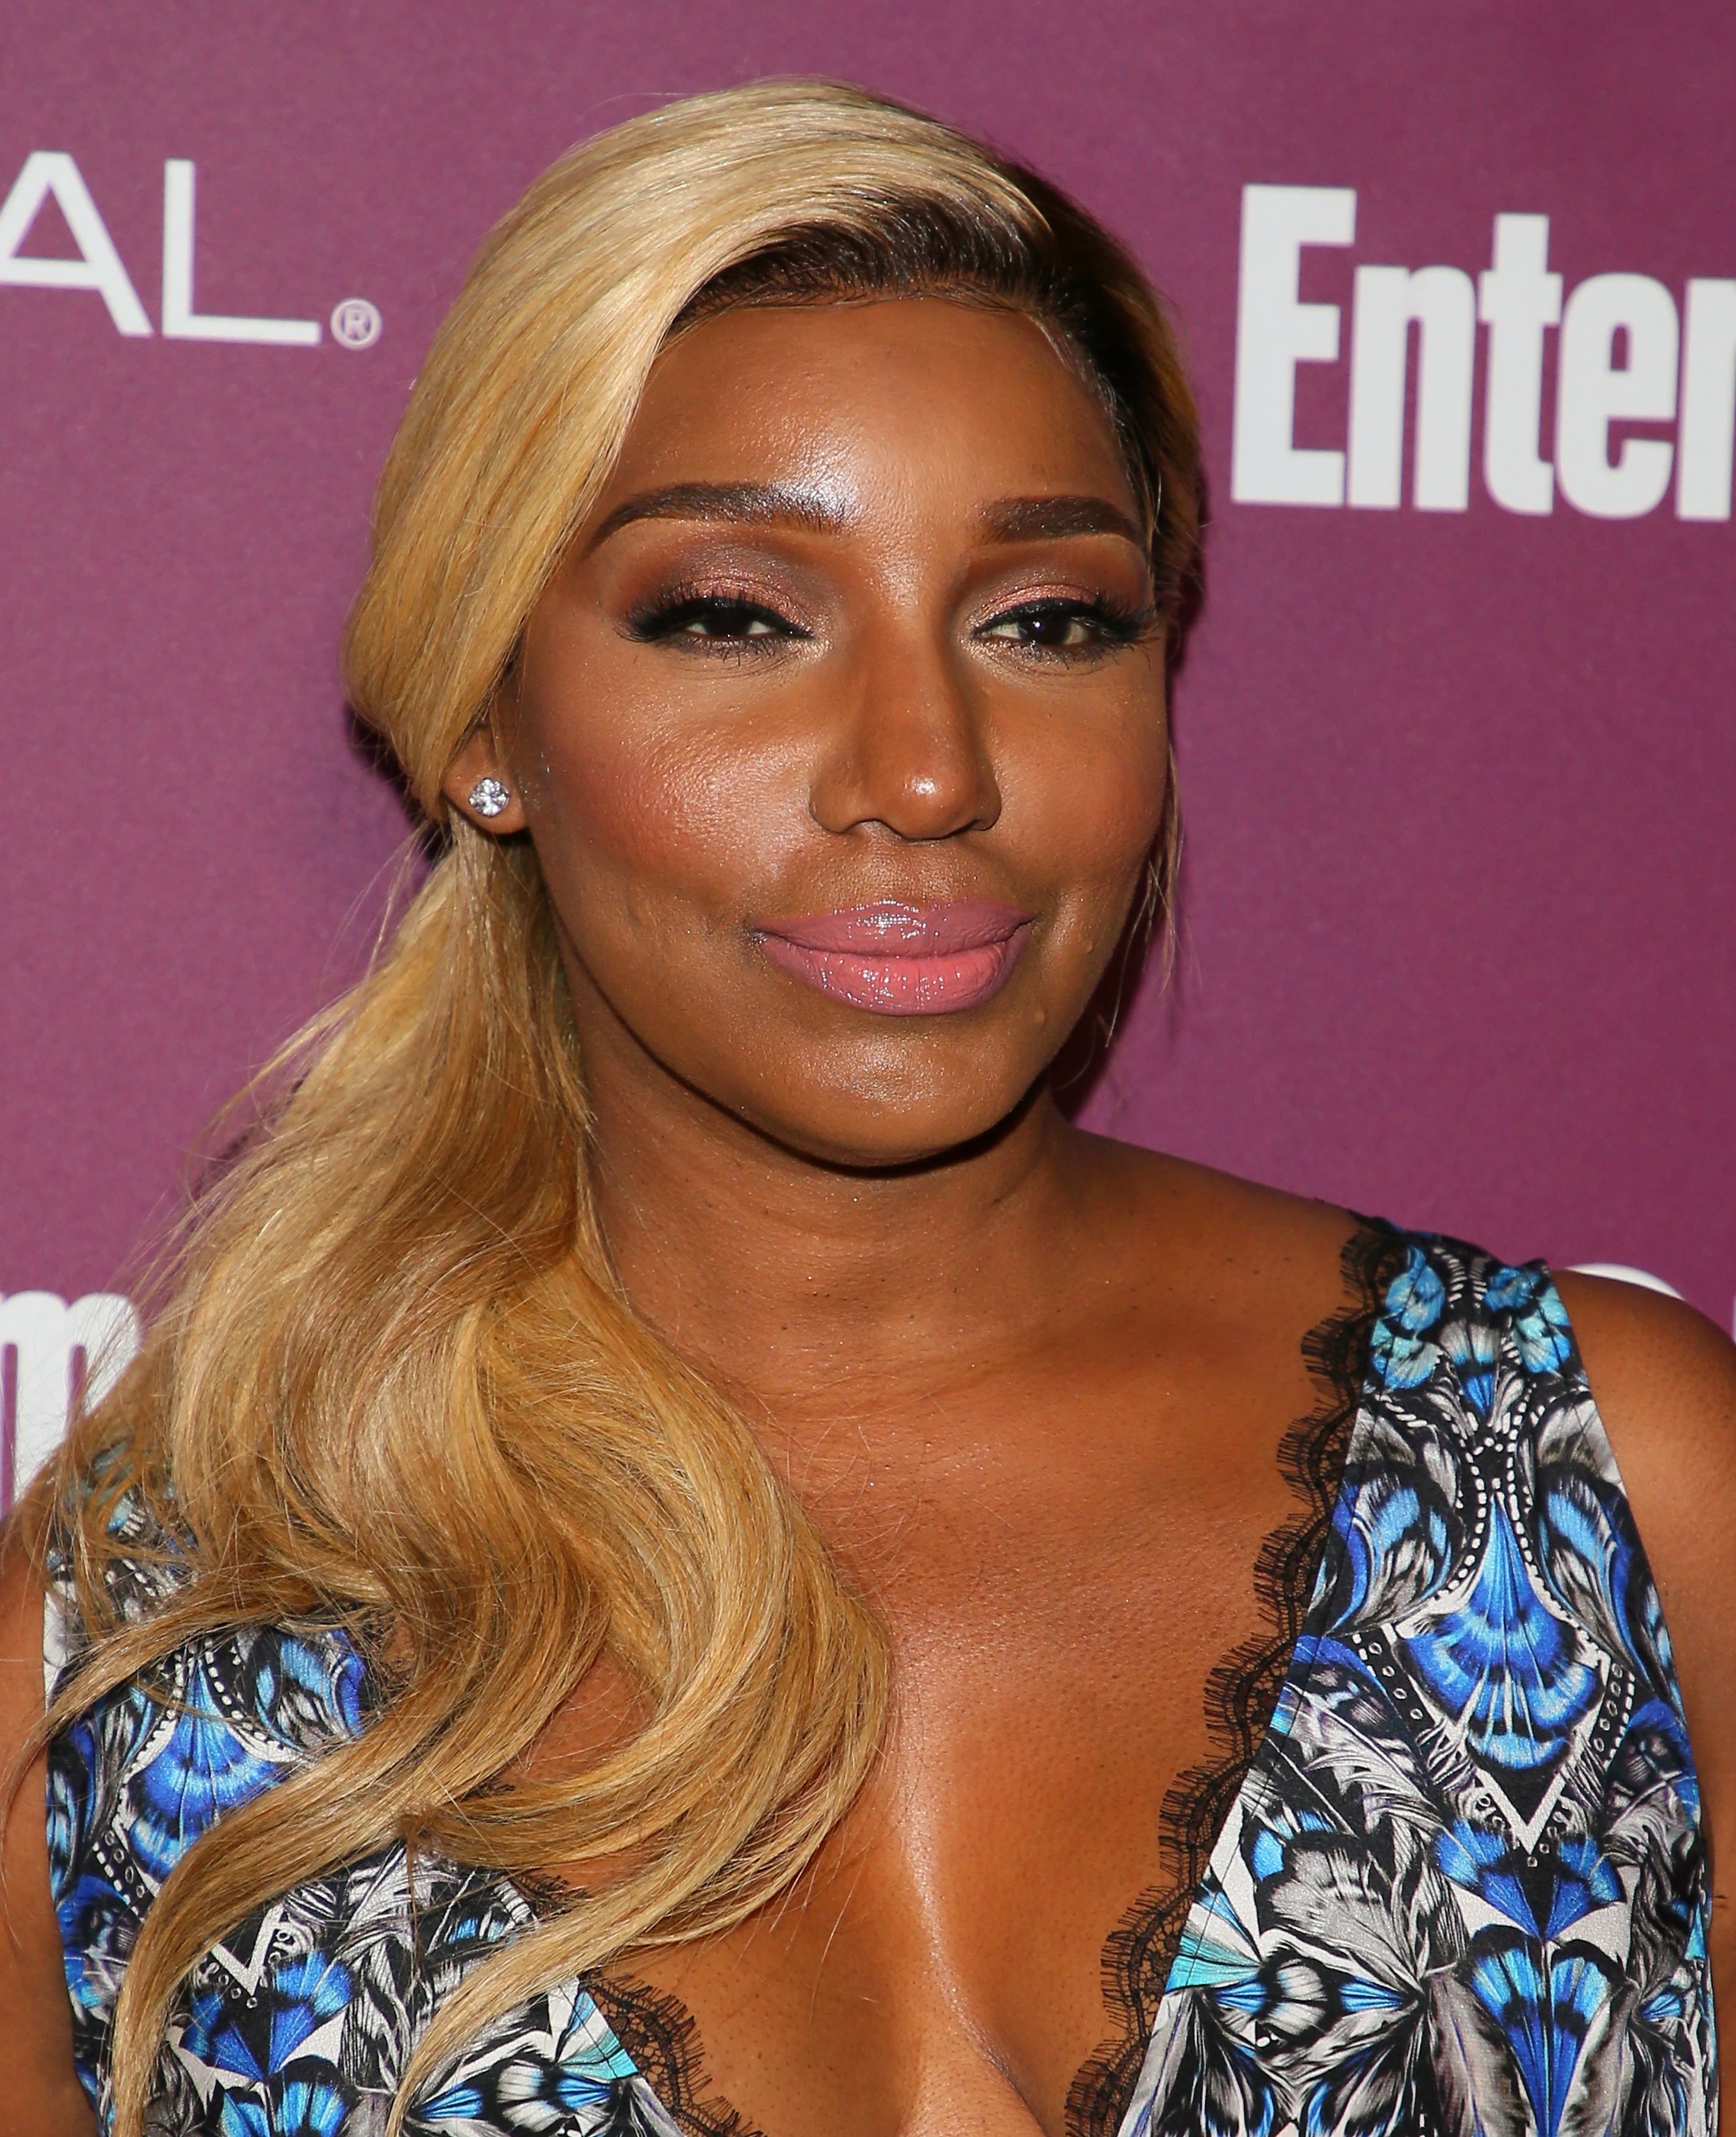 RHOA'S Nene Leakes Wanted For Questioning By Police | Majic 94.5